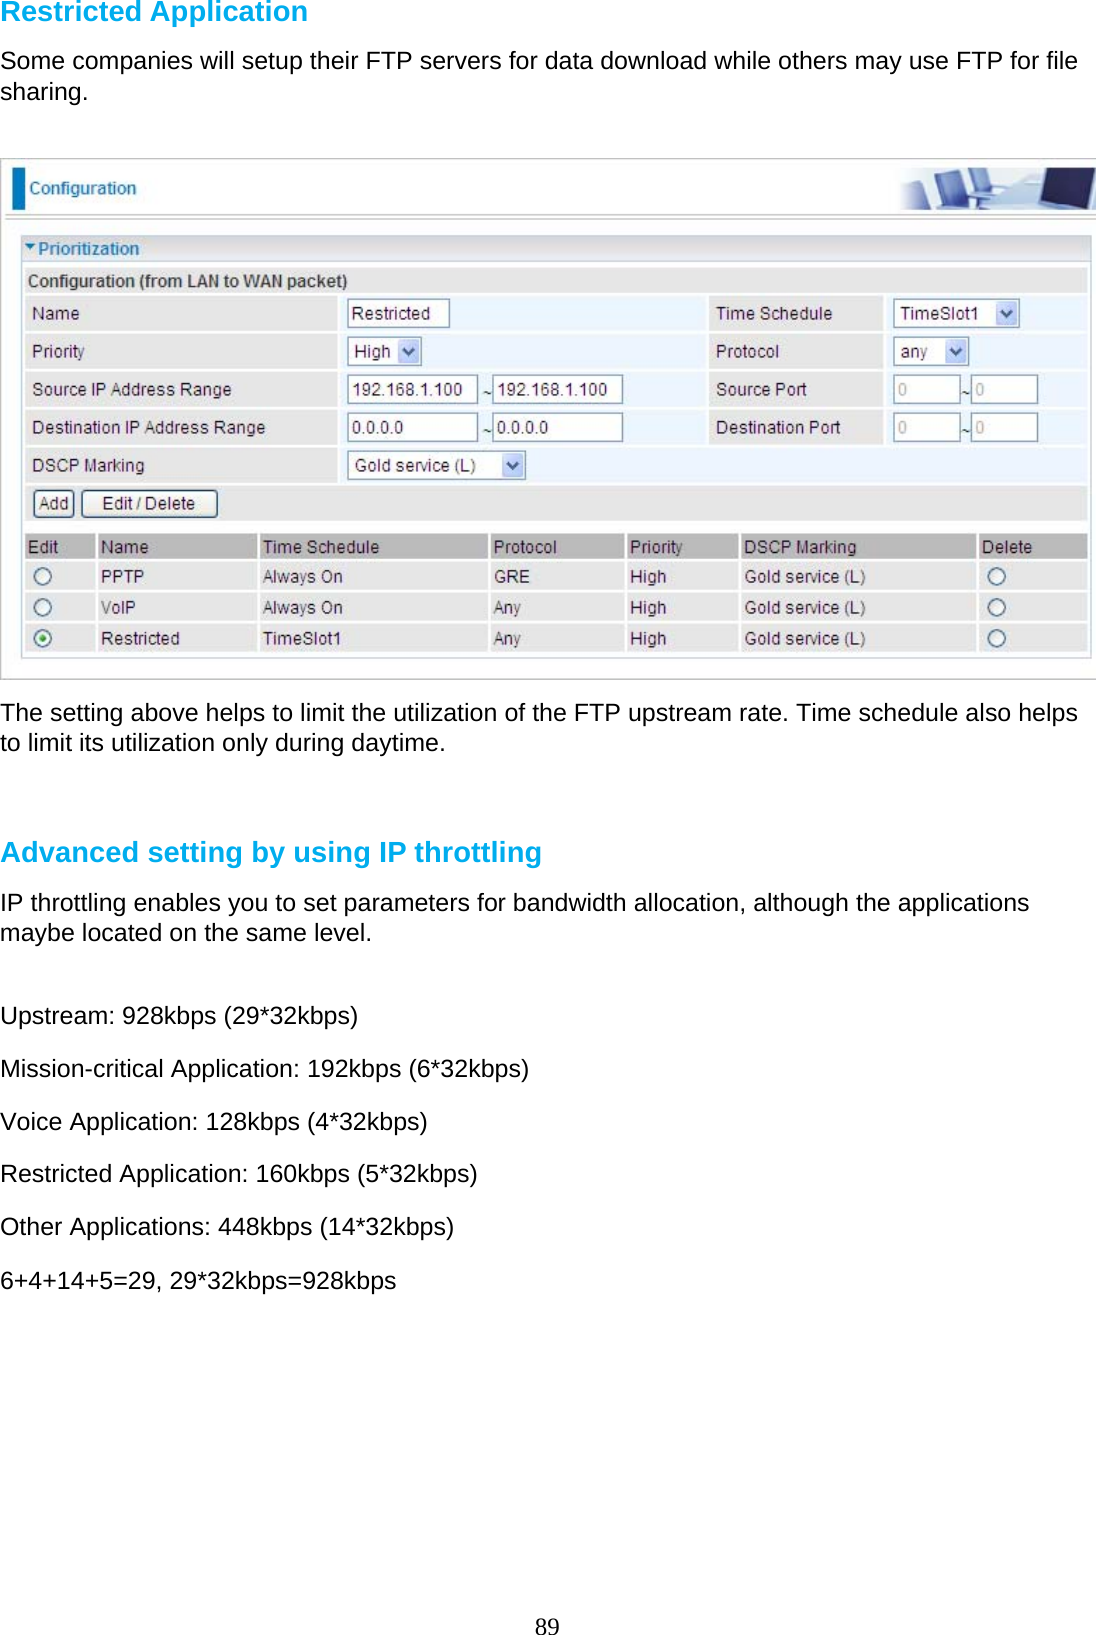 89 Restricted Application  Some companies will setup their FTP servers for data download while others may use FTP for file sharing.      The setting above helps to limit the utilization of the FTP upstream rate. Time schedule also helps to limit its utilization only during daytime.     Advanced setting by using IP throttling  IP throttling enables you to set parameters for bandwidth allocation, although the applications maybe located on the same level.    Upstream: 928kbps (29*32kbps)  Mission-critical Application: 192kbps (6*32kbps) Voice Application: 128kbps (4*32kbps) Restricted Application: 160kbps (5*32kbps) Other Applications: 448kbps (14*32kbps) 6+4+14+5=29, 29*32kbps=928kbps 